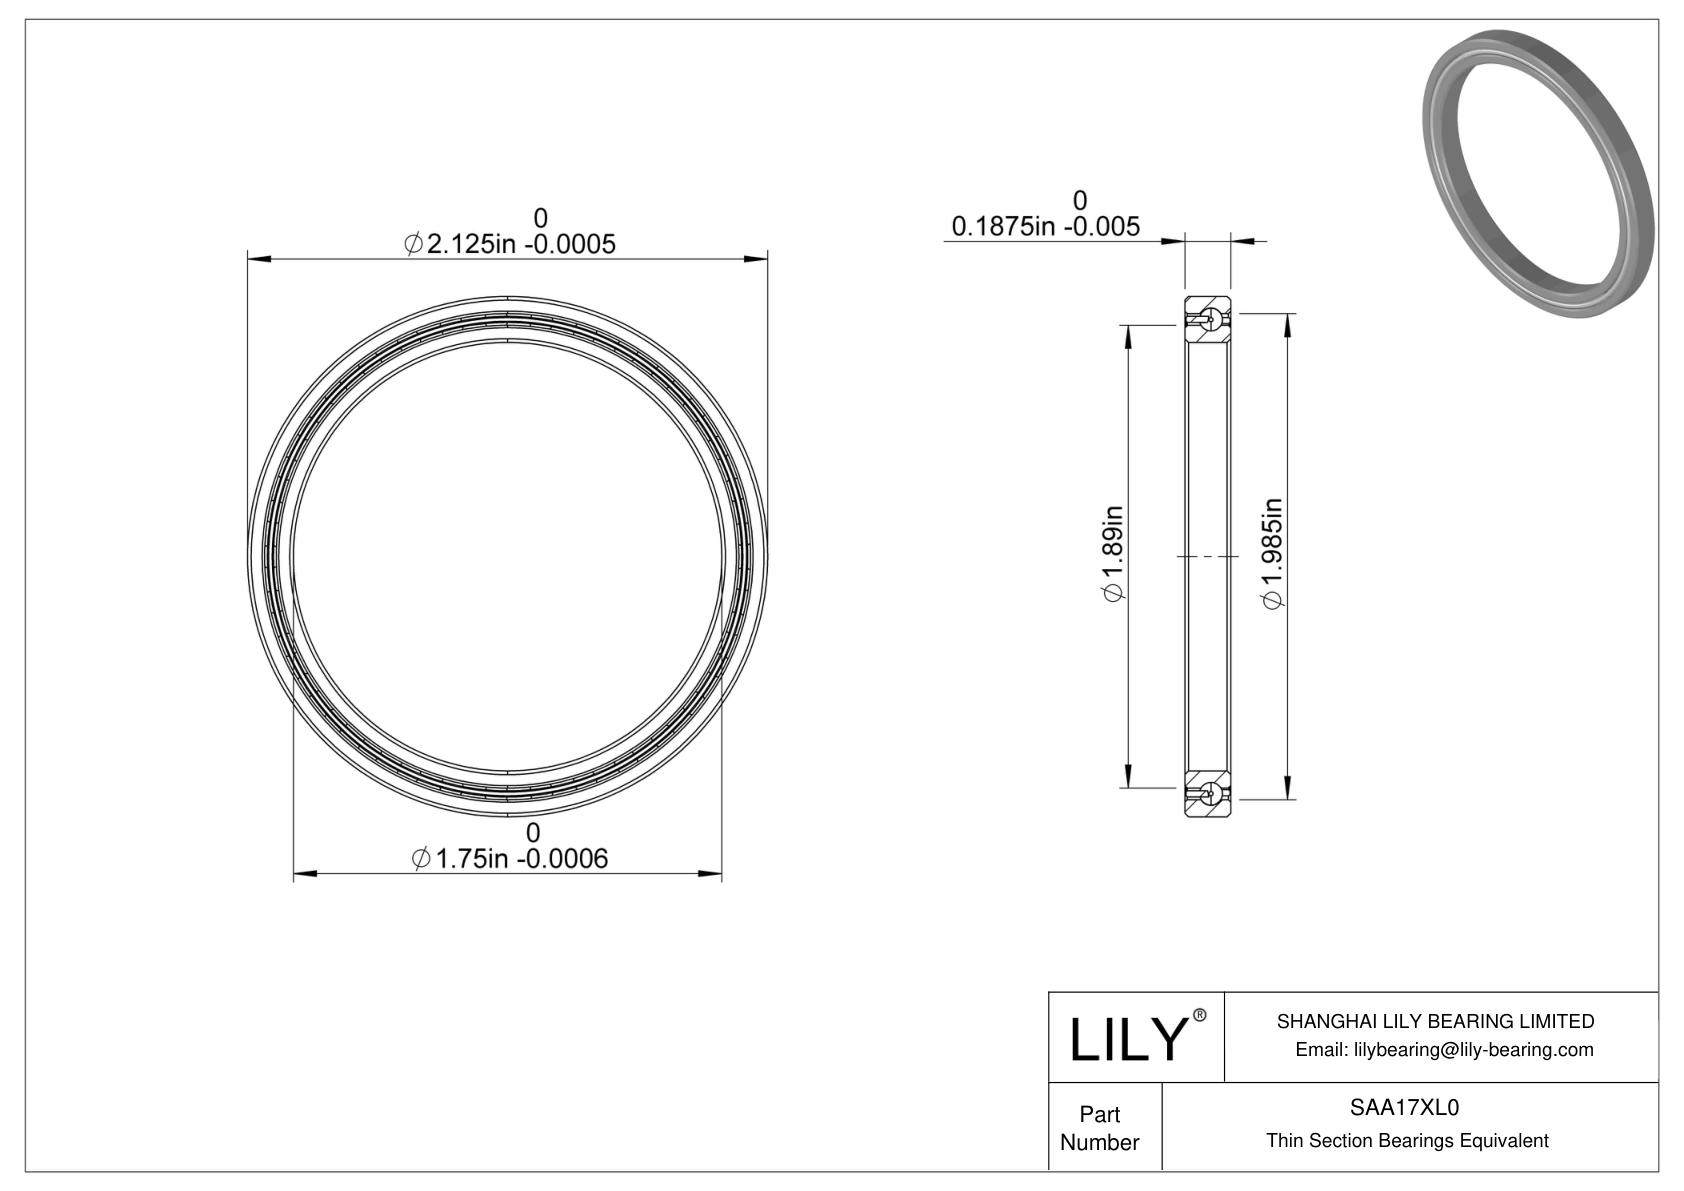 SAA17XL0 Constant Section (CS) Bearings CAD图形